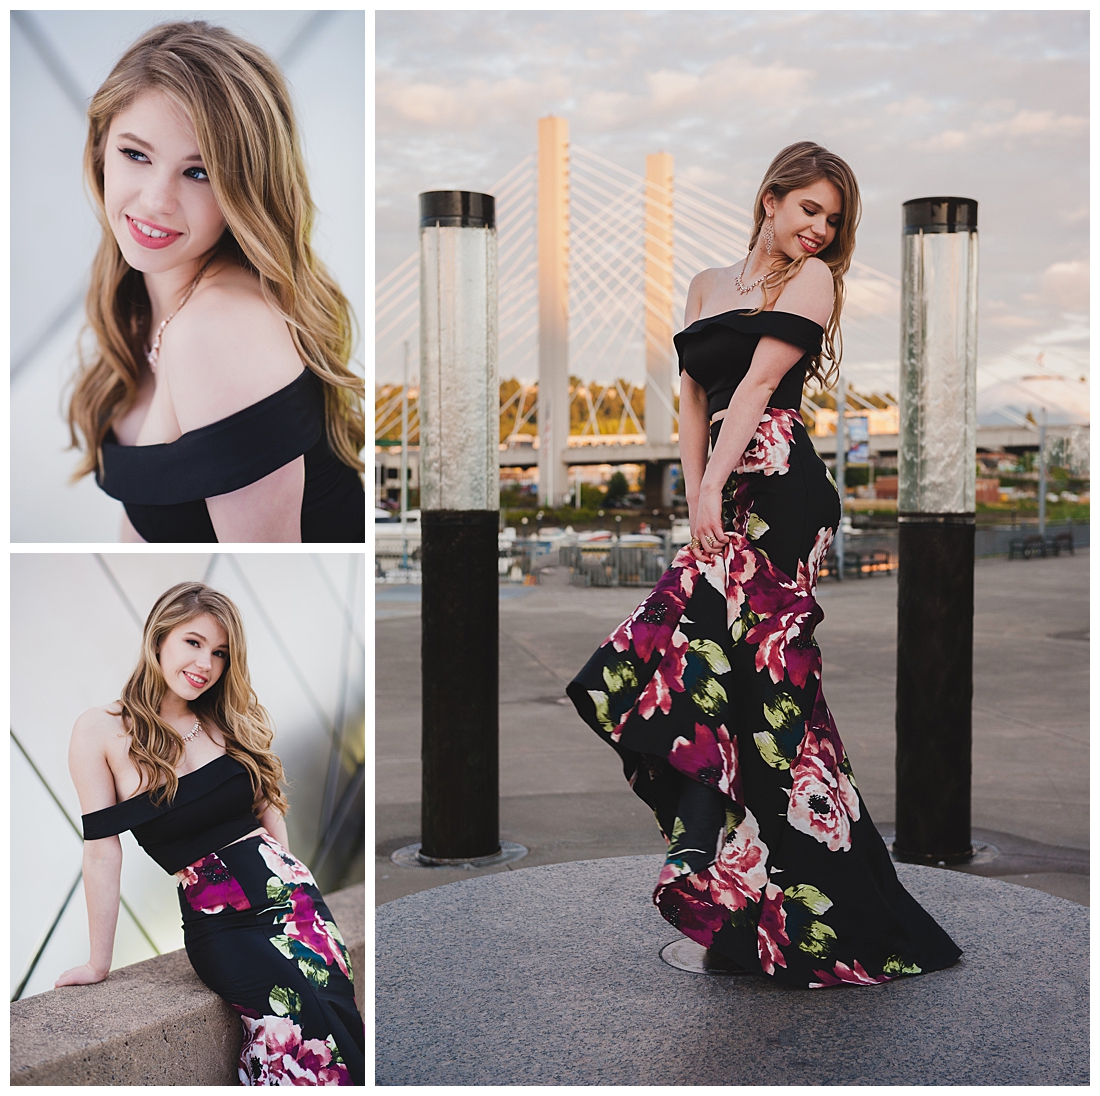 Senior Portraits with Floral Gown and Floral Print in Downtown Tacoma Photographed by Amanda Howse